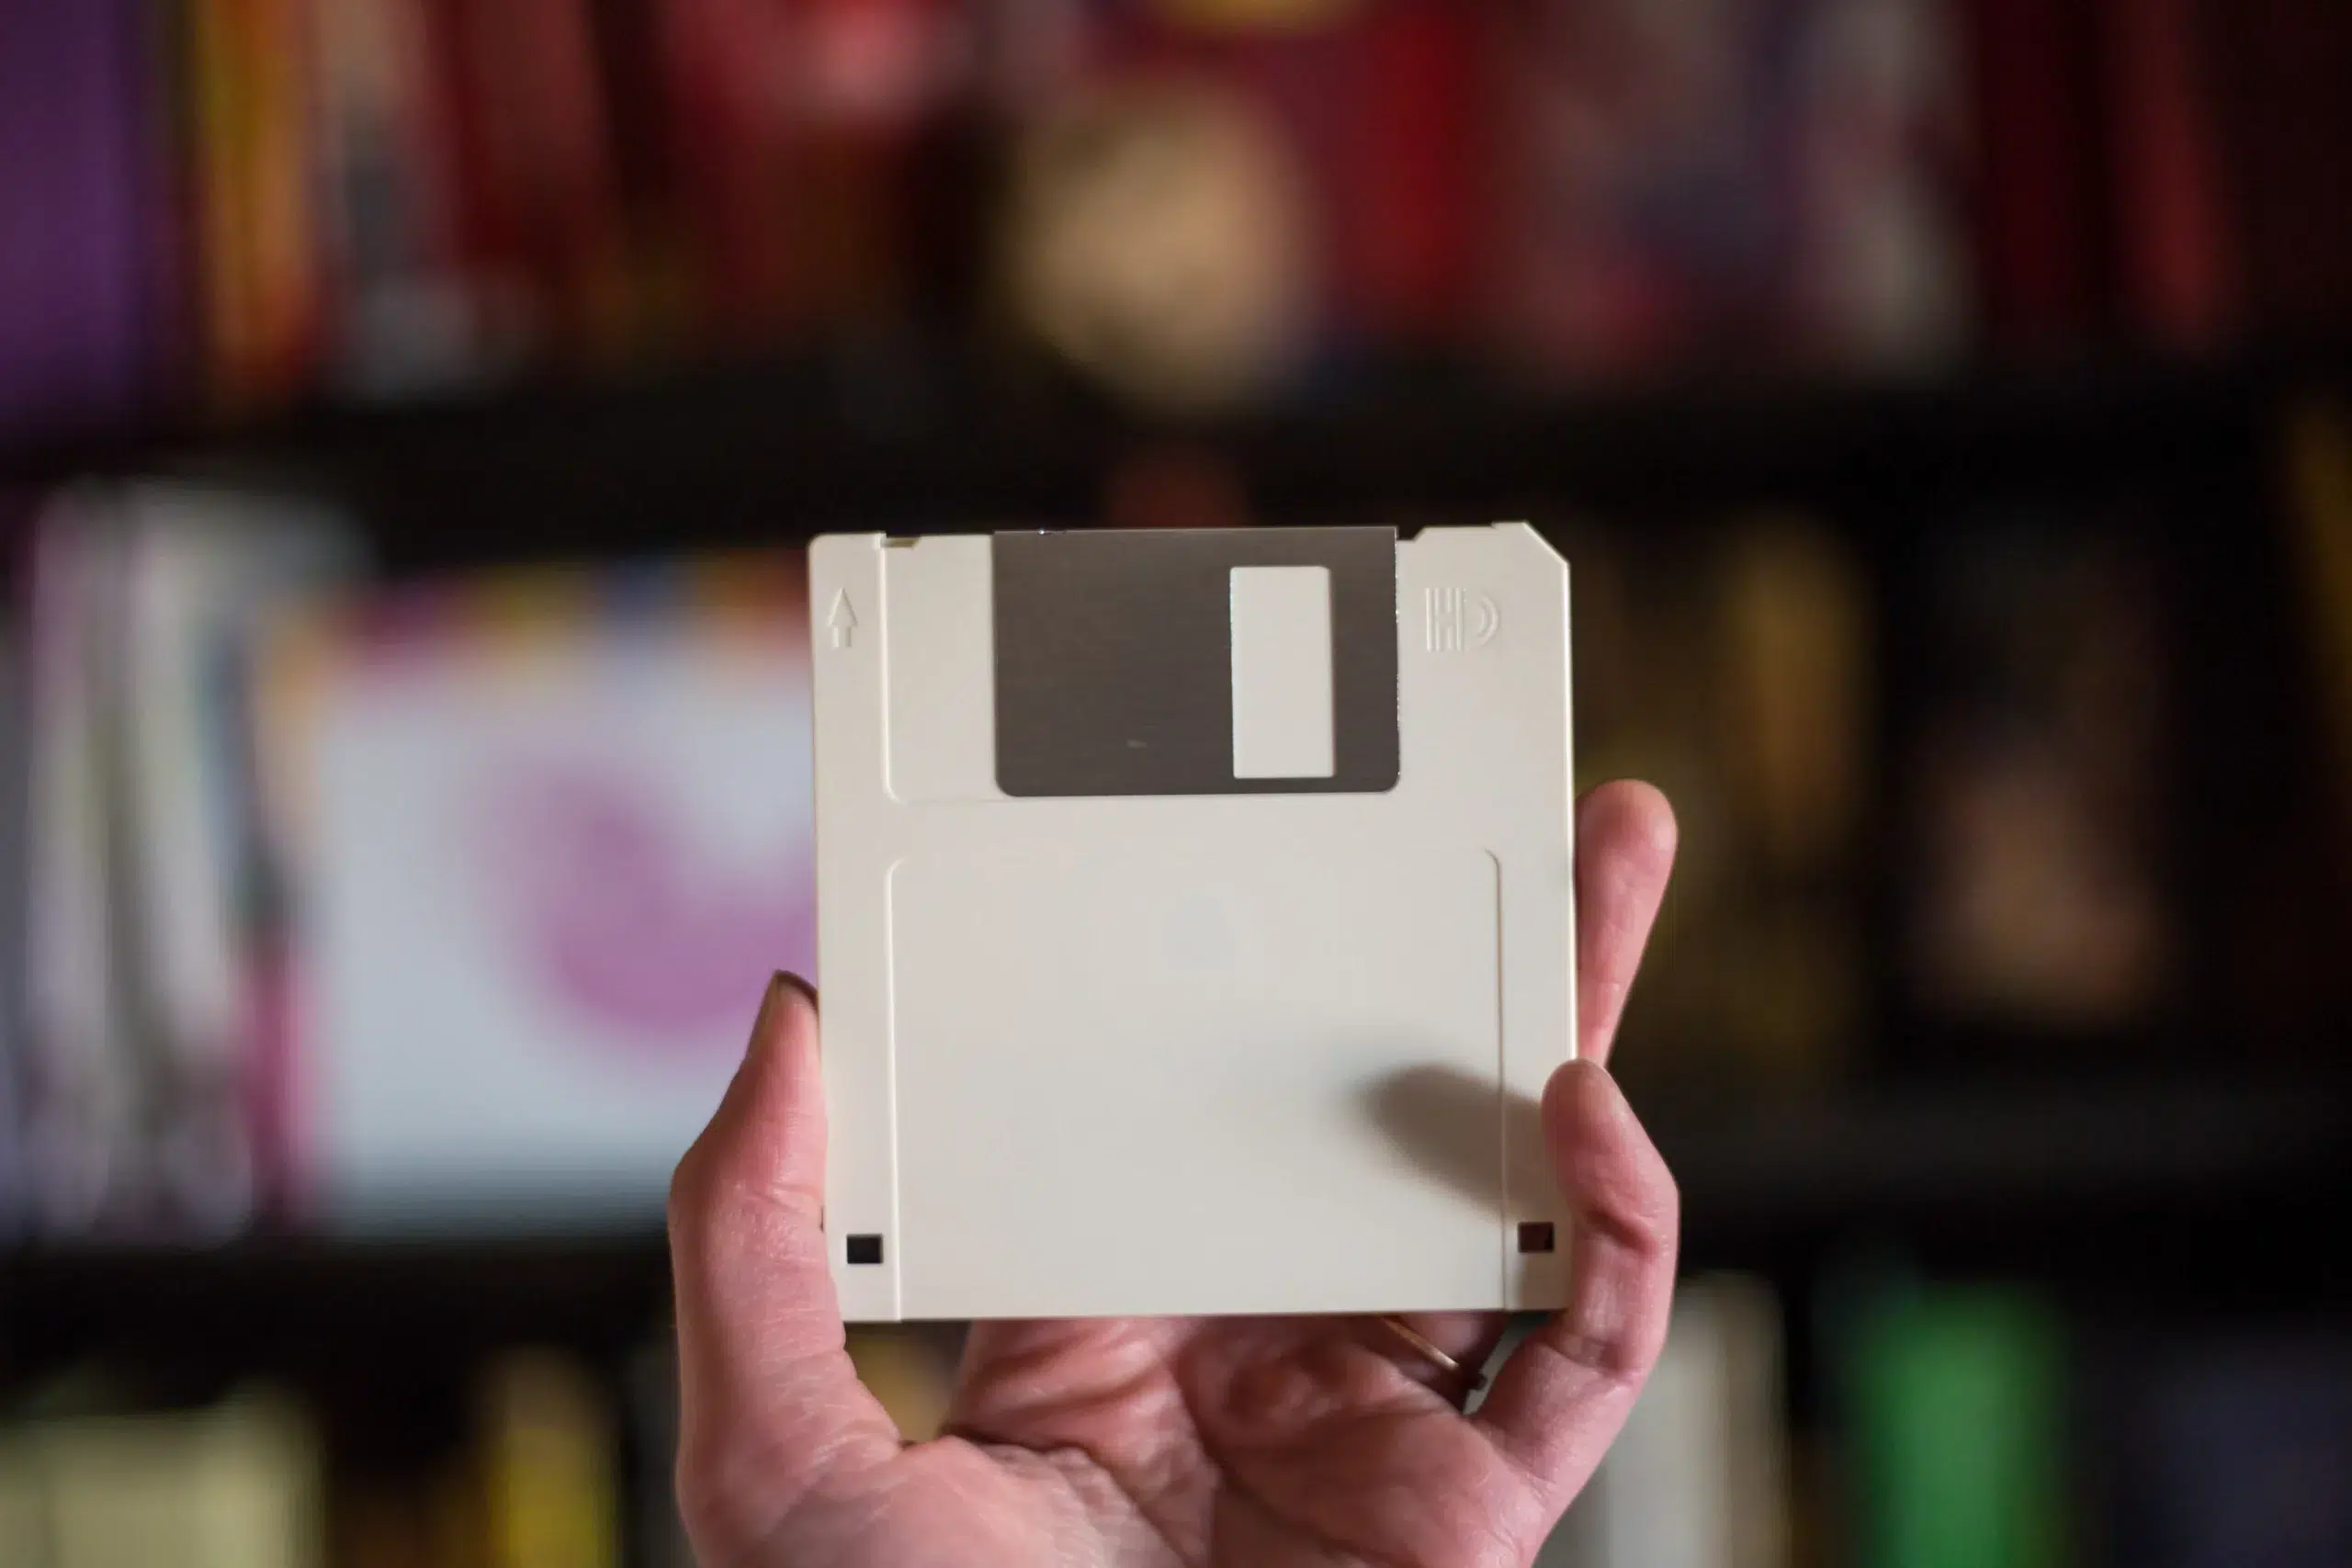 Woman holding 3.5" floppy disk